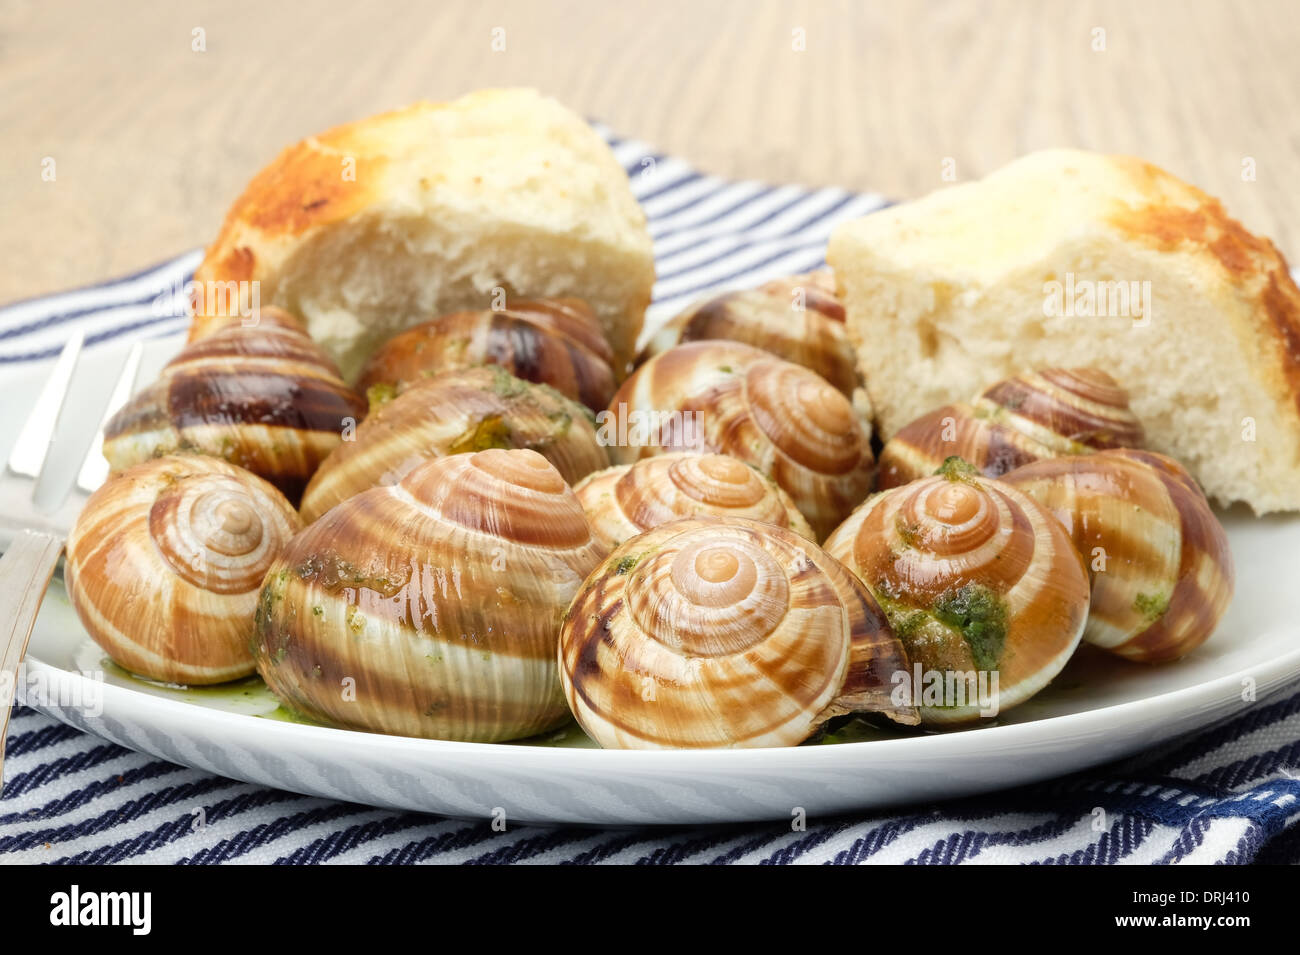 Traditional Escargot - French snails with a tasty garlic and herb sauce Stock Photo